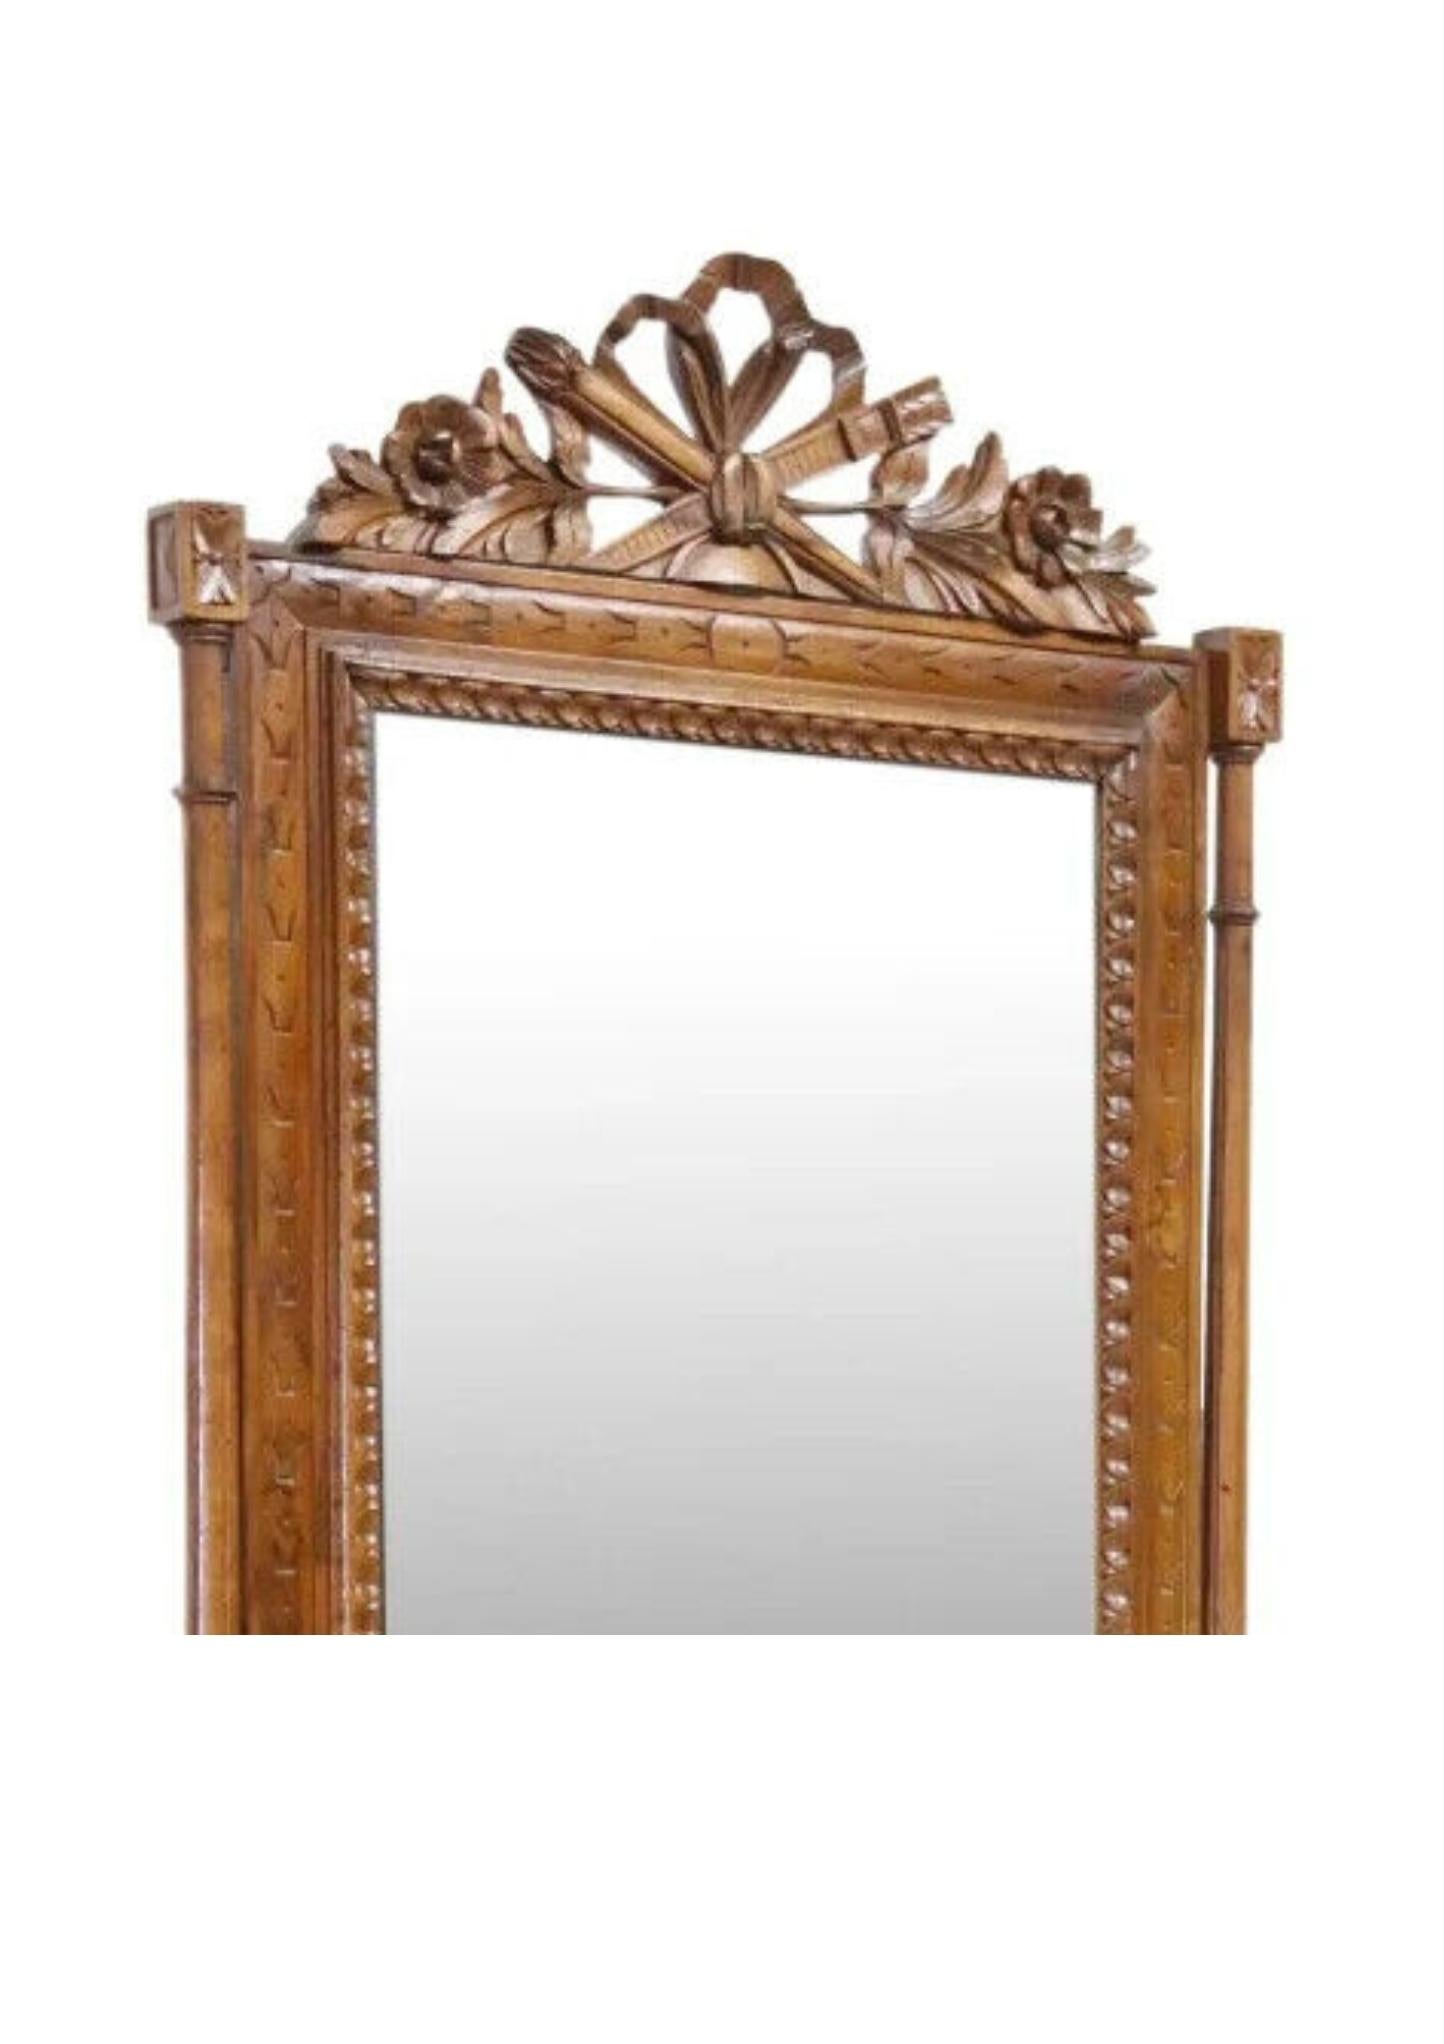 Stunning Antique Hall Stand, Mirrored, Italian  Carved, Walnut, Beveled Mirror, E. 1900's, 20th C. 

Italian carved walnut mirrored hall stand, early 20th c., having torch and quiver crest with floral motifs, over central beveled mirror plate,